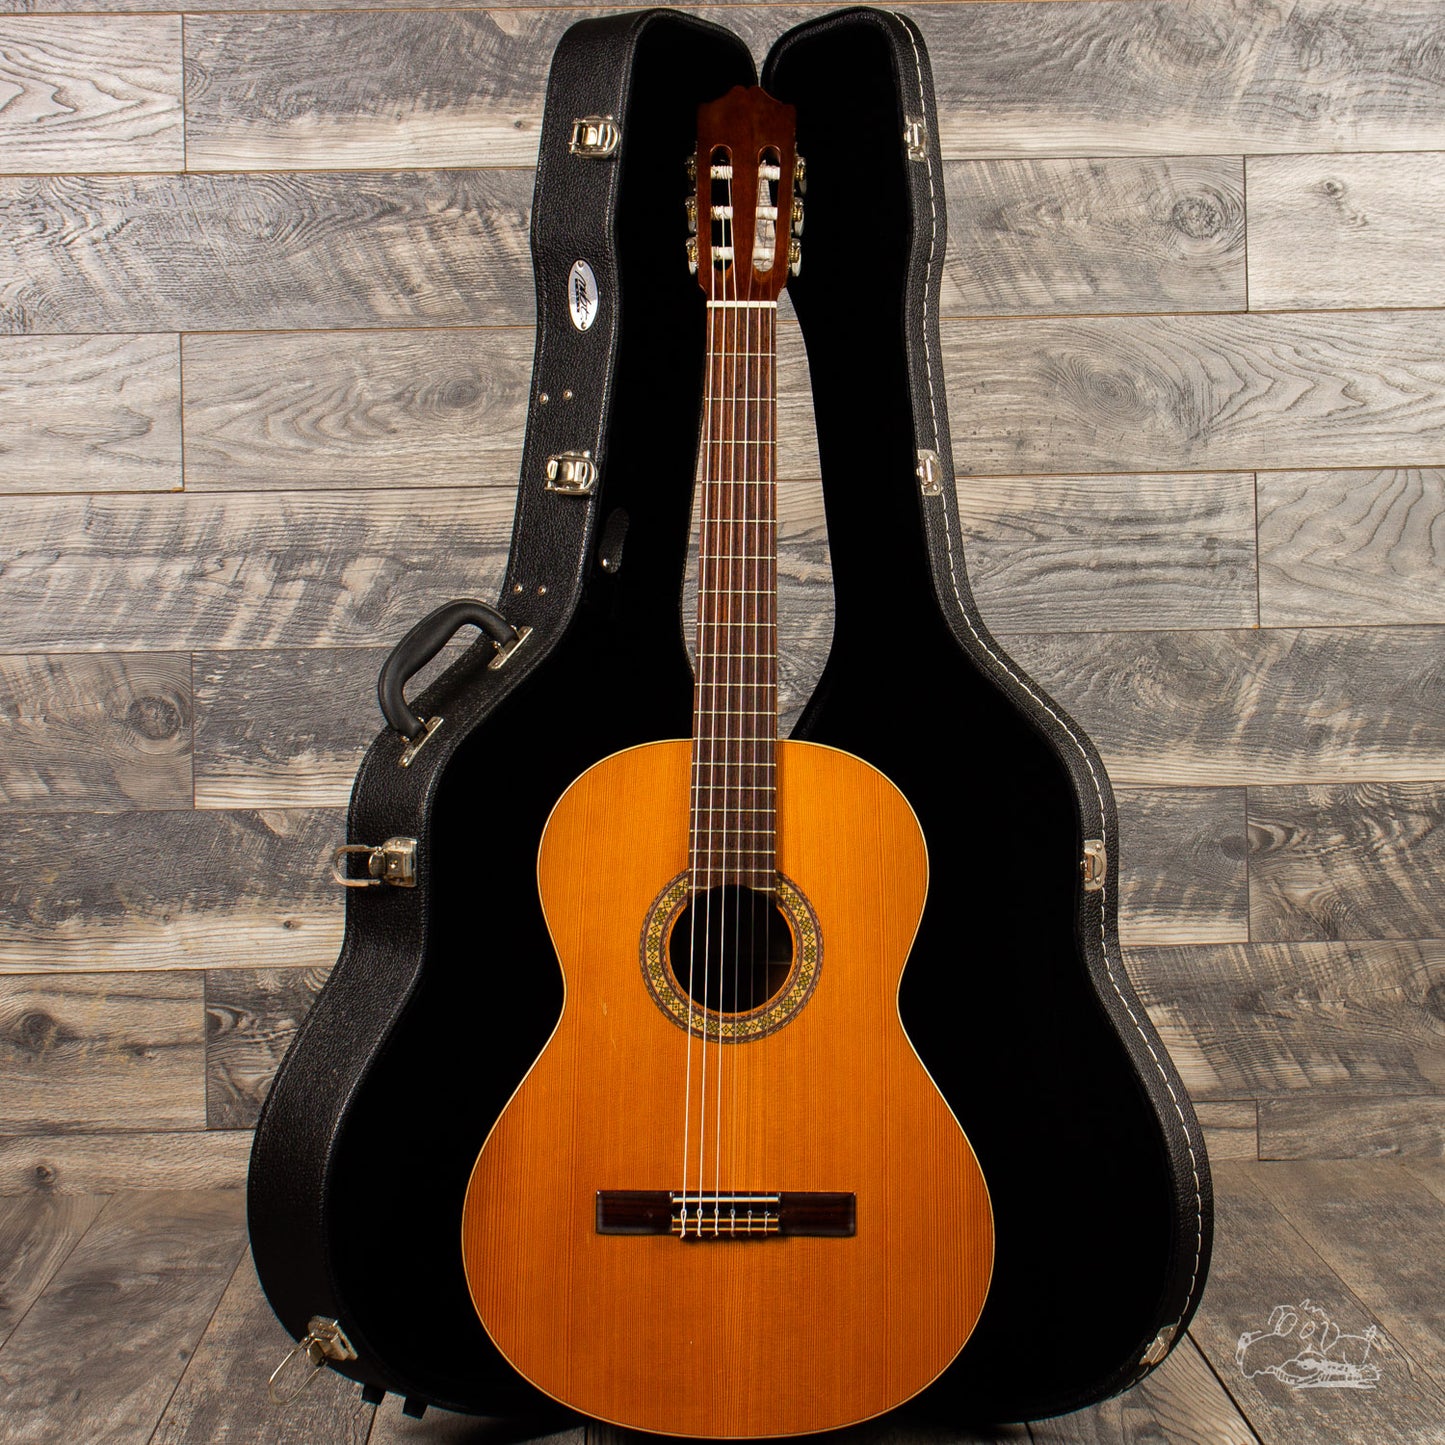 Cordoba Model 20 with Deluxe MBT Hardshell Fitted Case - Make us an Offer.